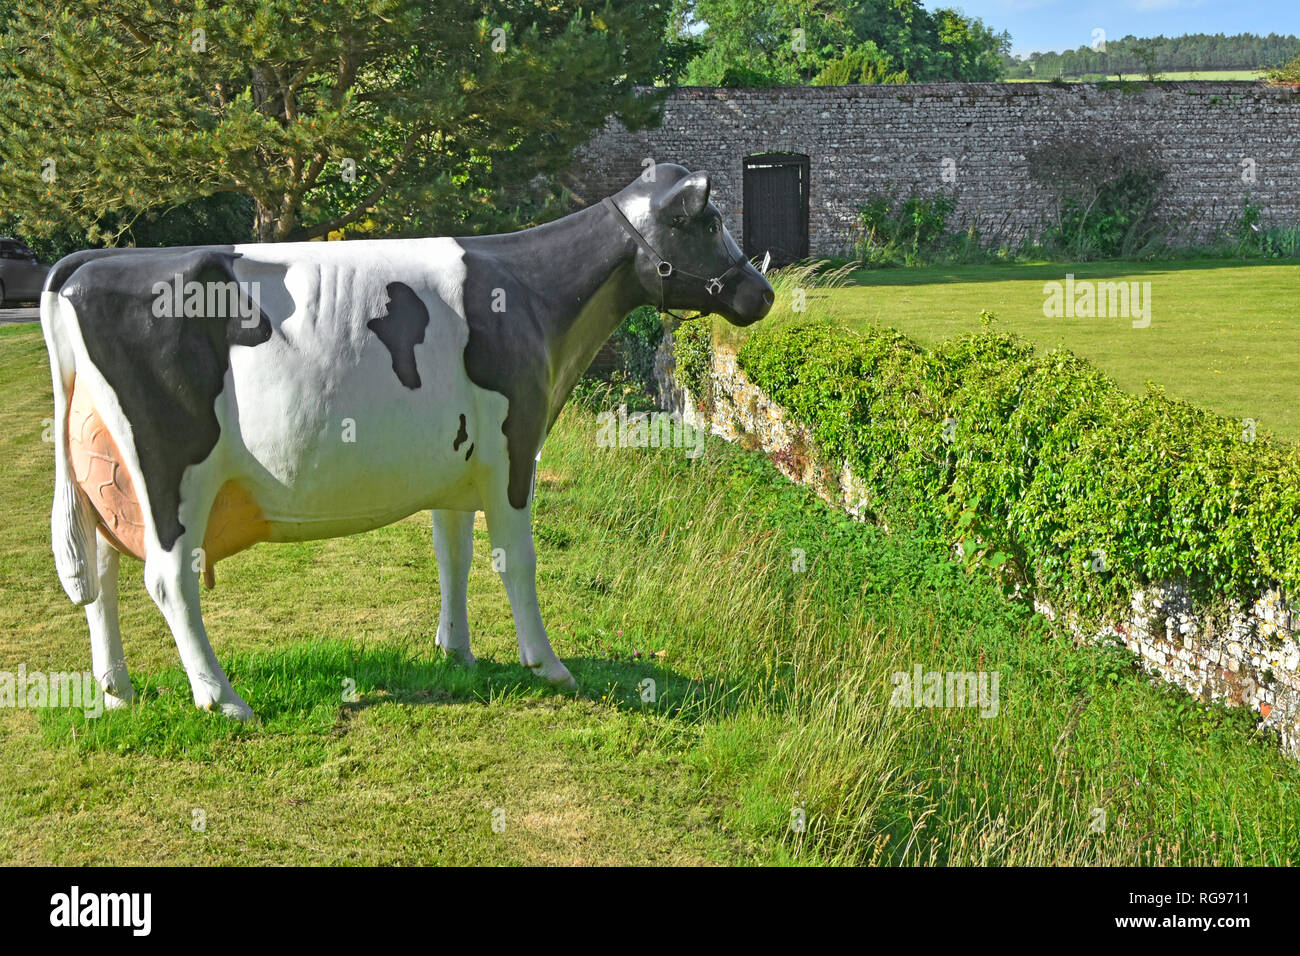 Friesian cow plastic model placed in grass field beside Ha Ha trench ditch with retaining wall to protect garden from cattle entering England UK Stock Photo